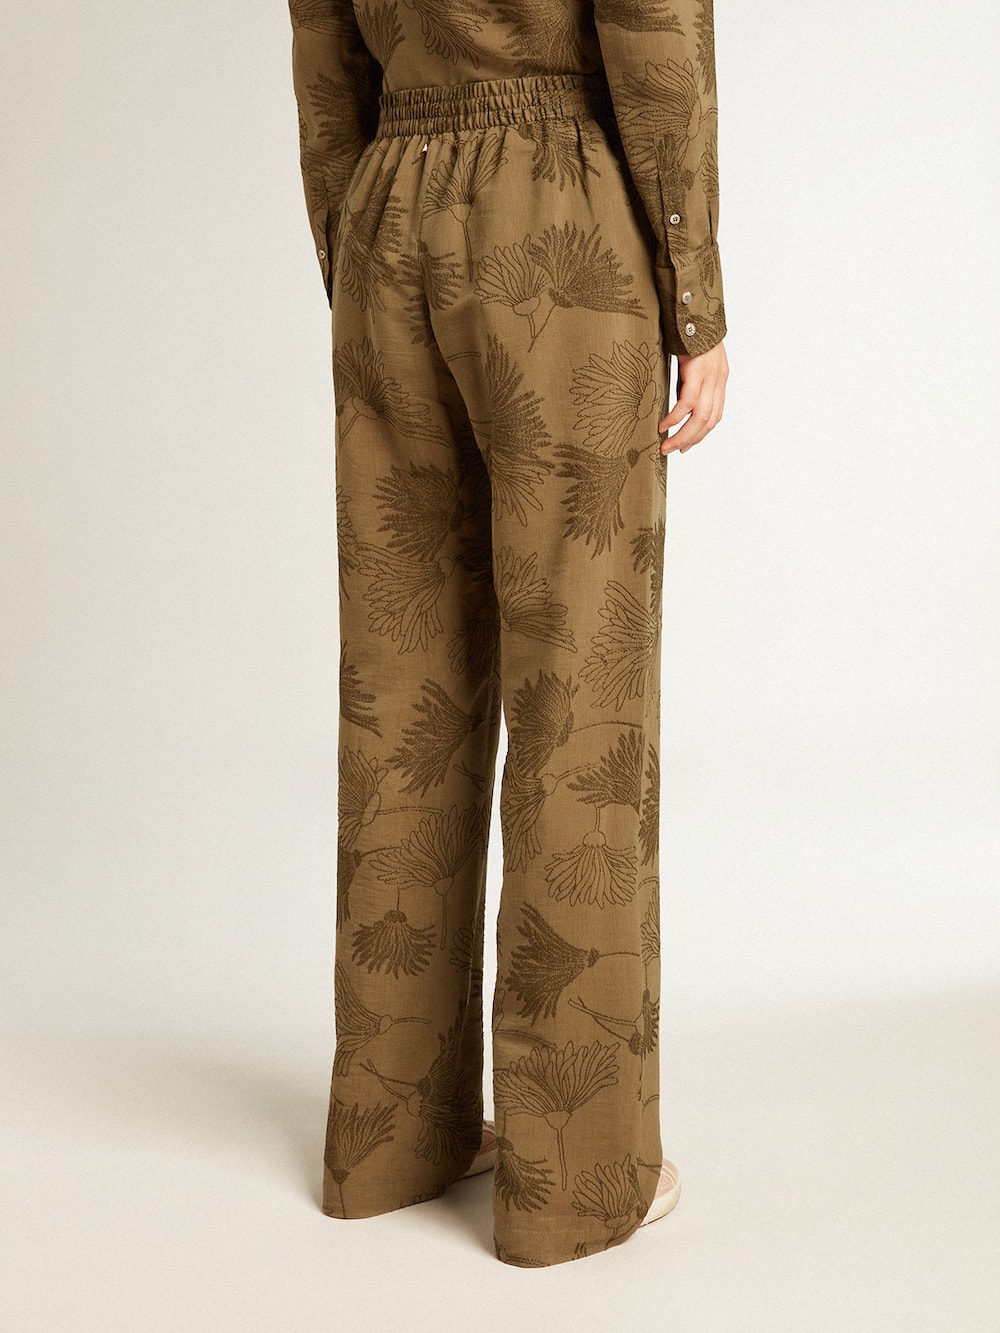 Golden Goose - Women's olive-colored viscose-cotton blend pants with floral pattern in 